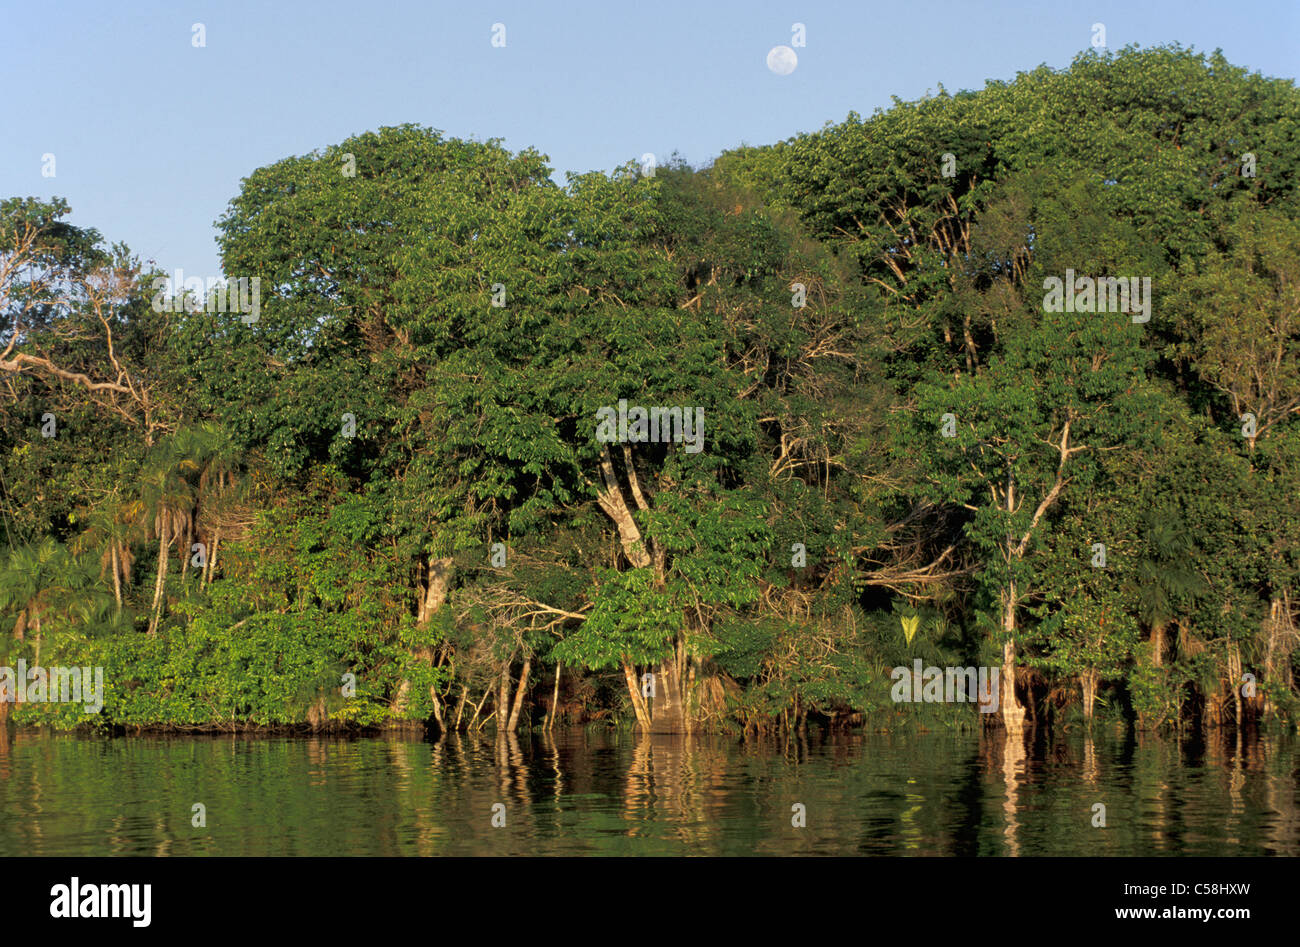 Amazon Brazil Basin High Resolution Stock Photography And Images Alamy